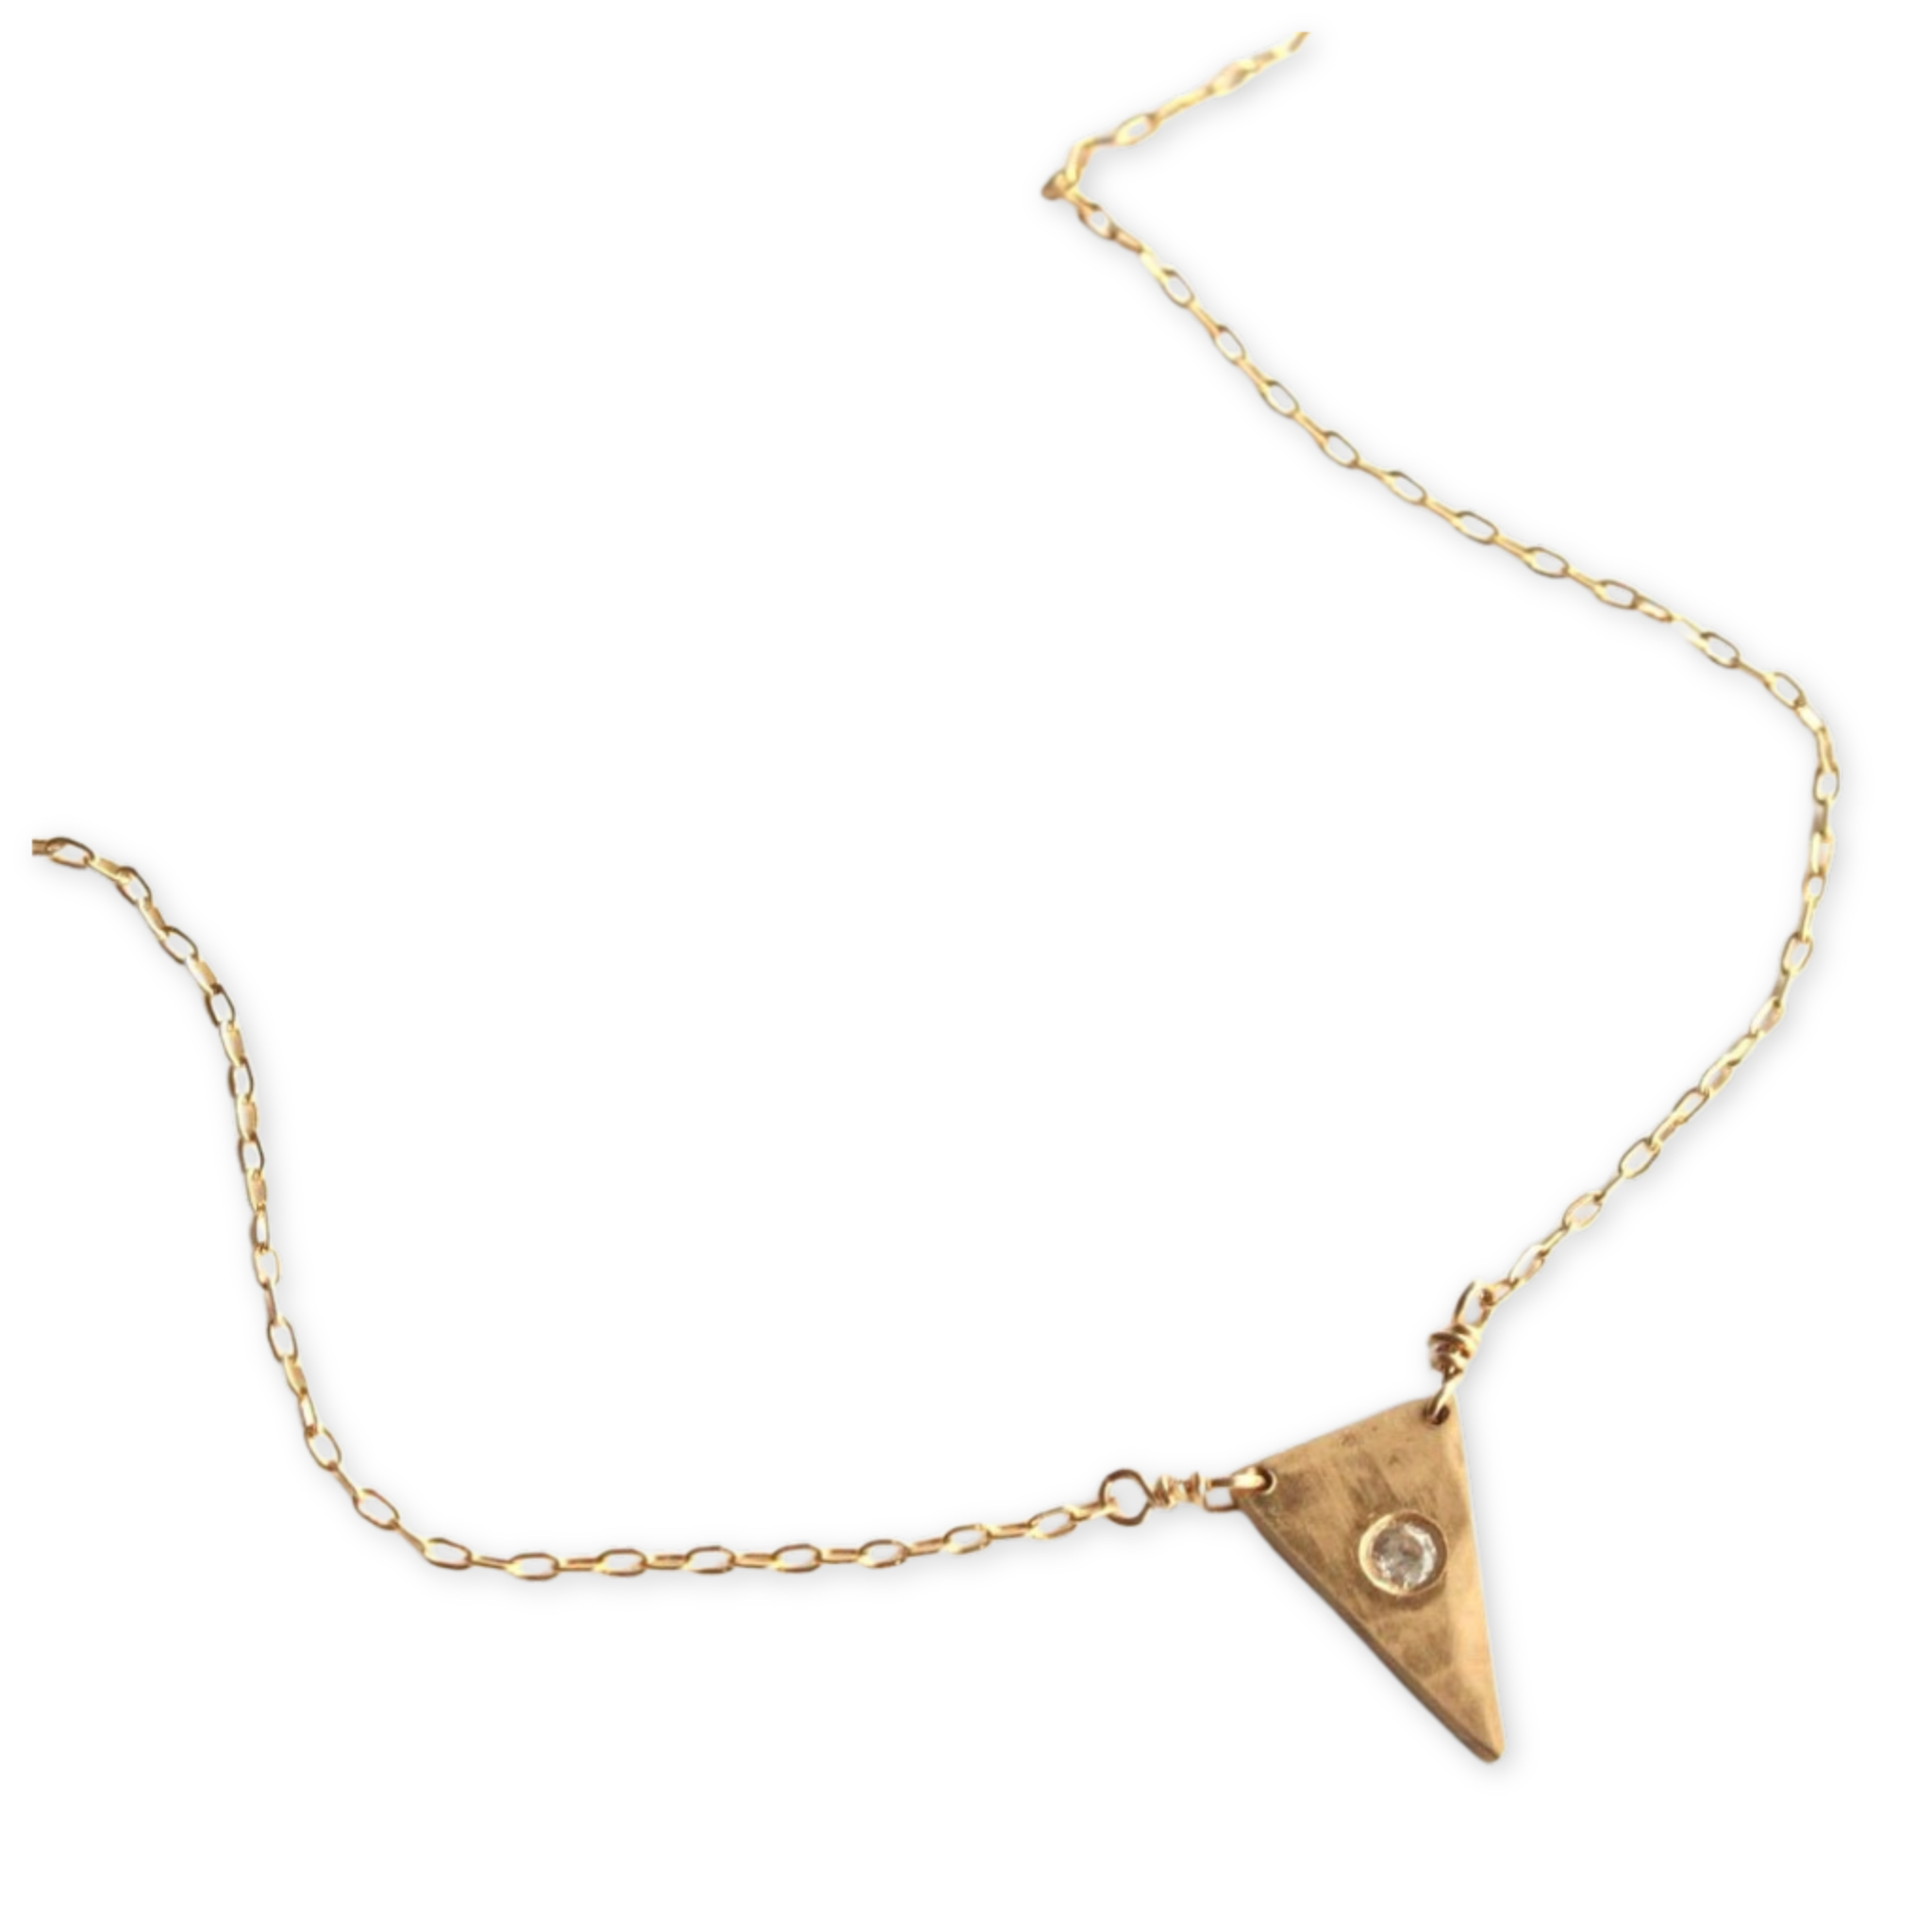 textured triangle pendant set with swavorski cubic zirconia hanging from a thin chain necklace